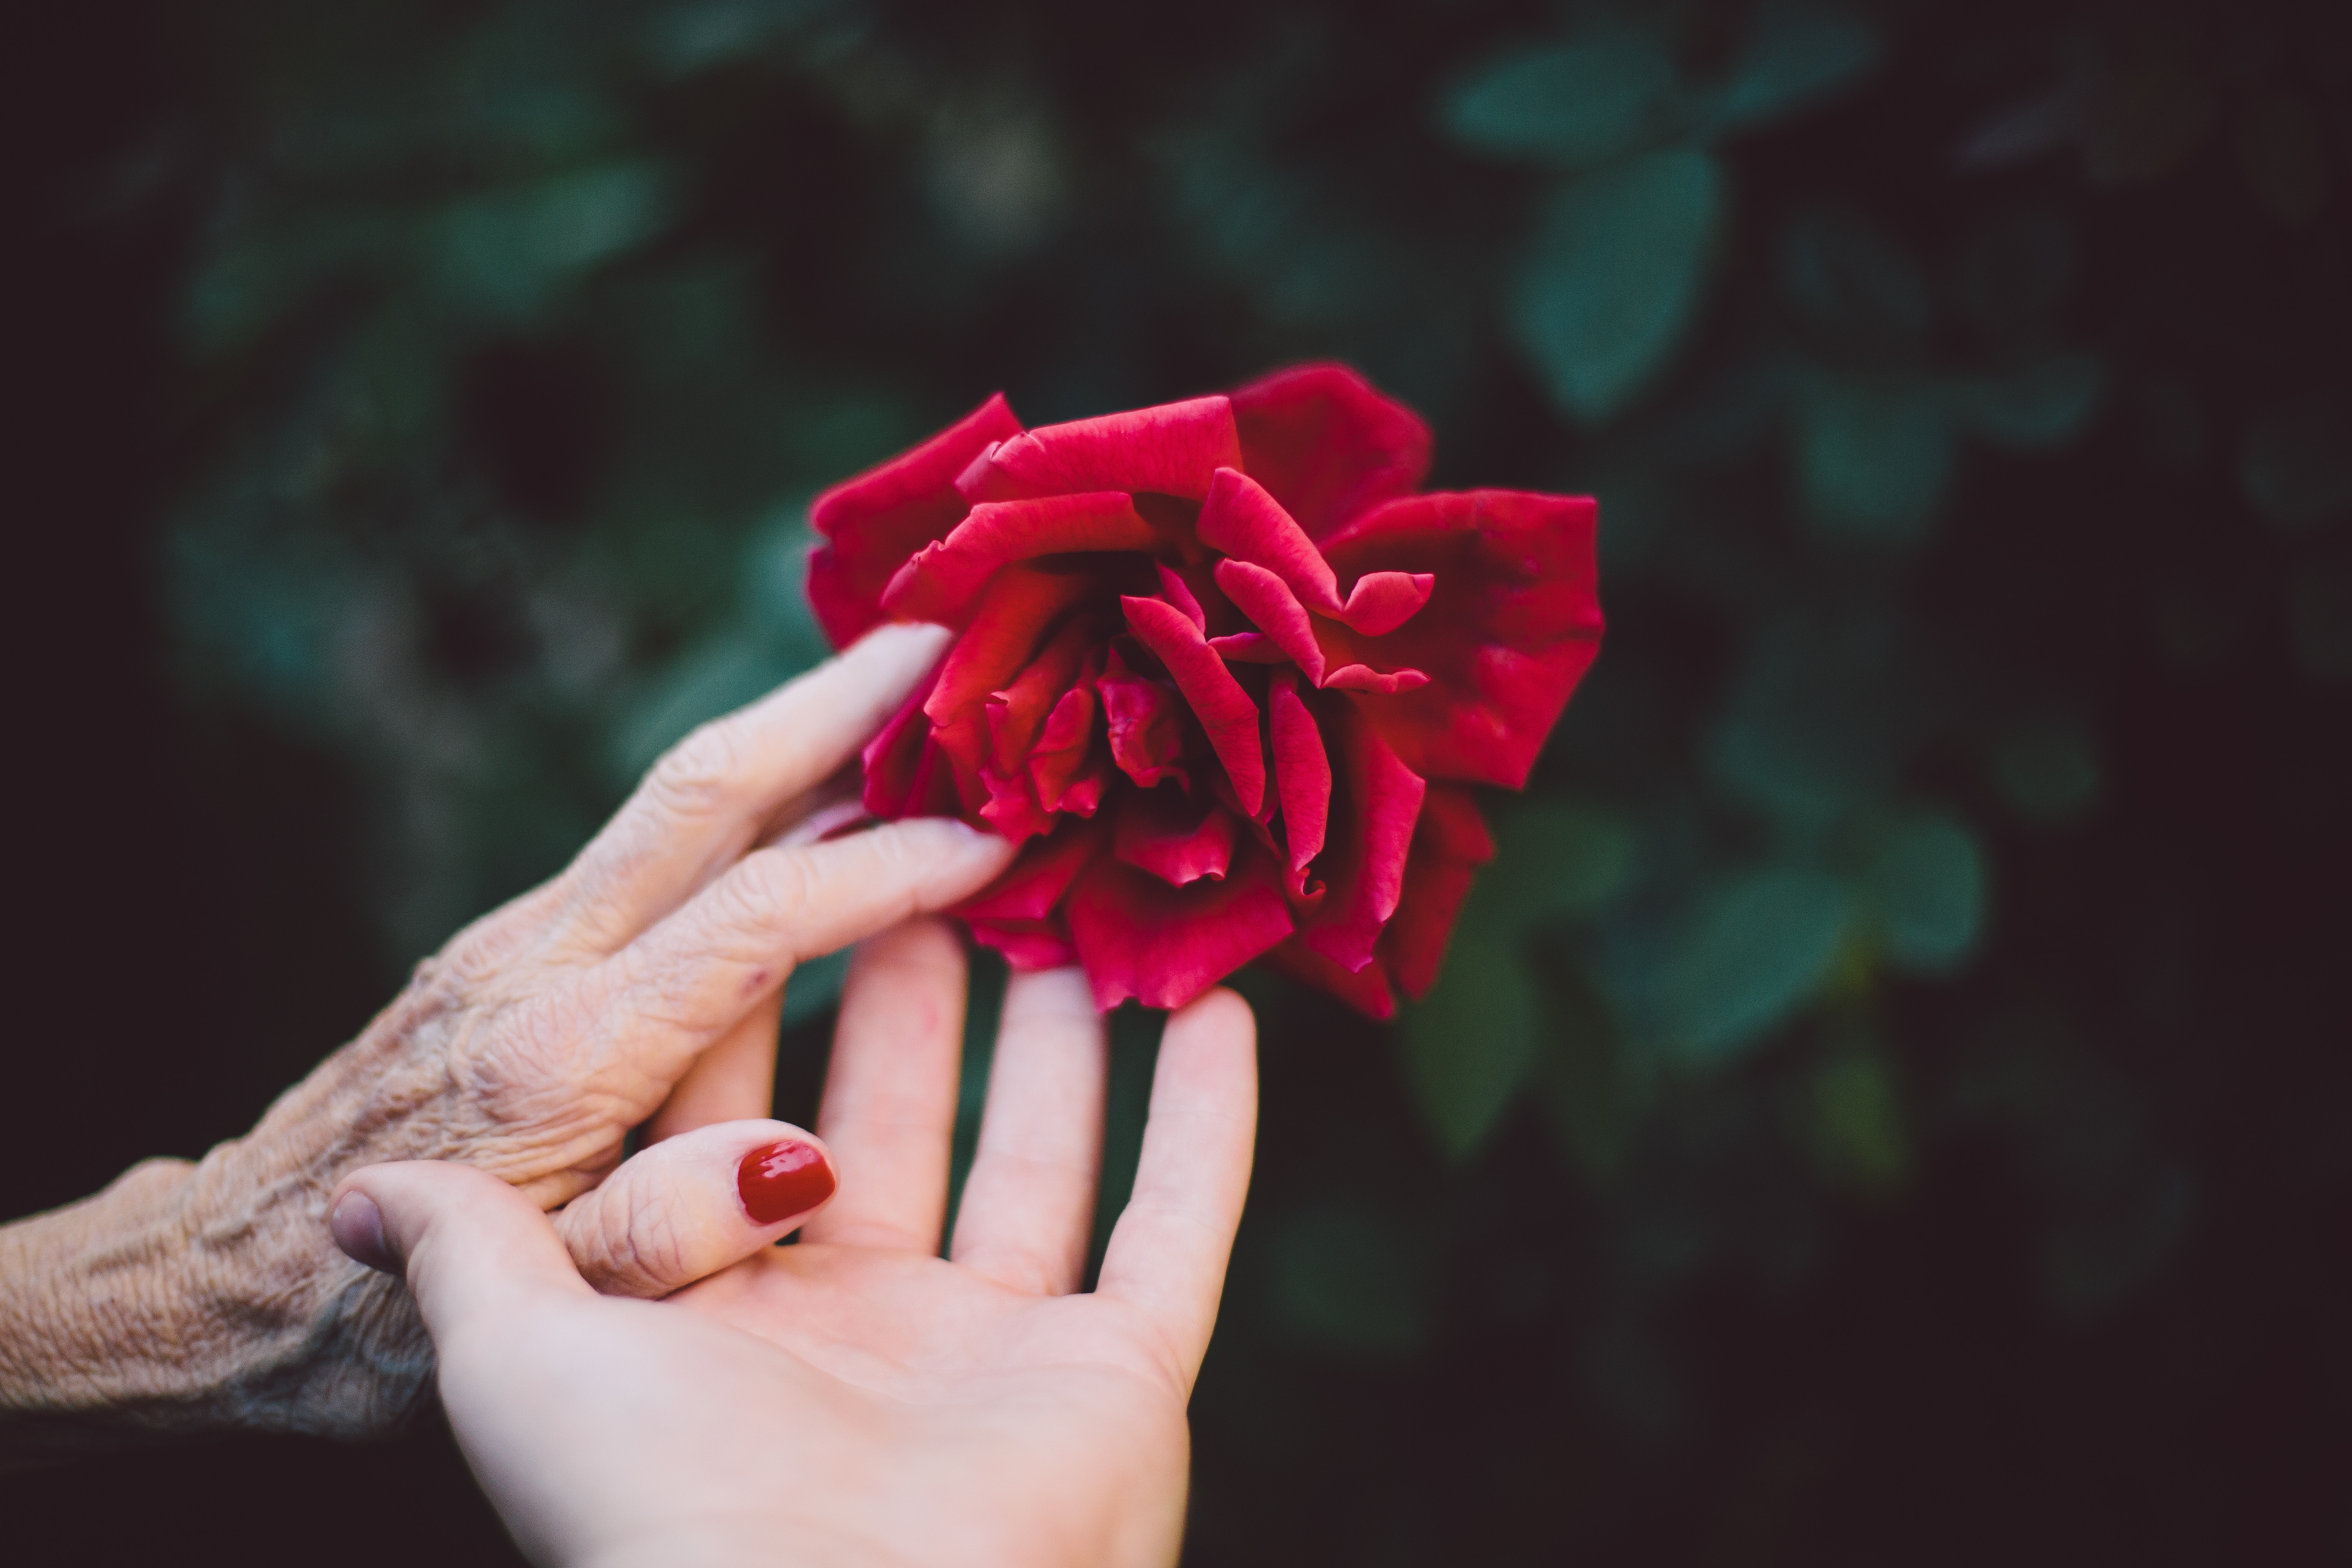 Young woman and elderly woman's hands touching each other and a red rose